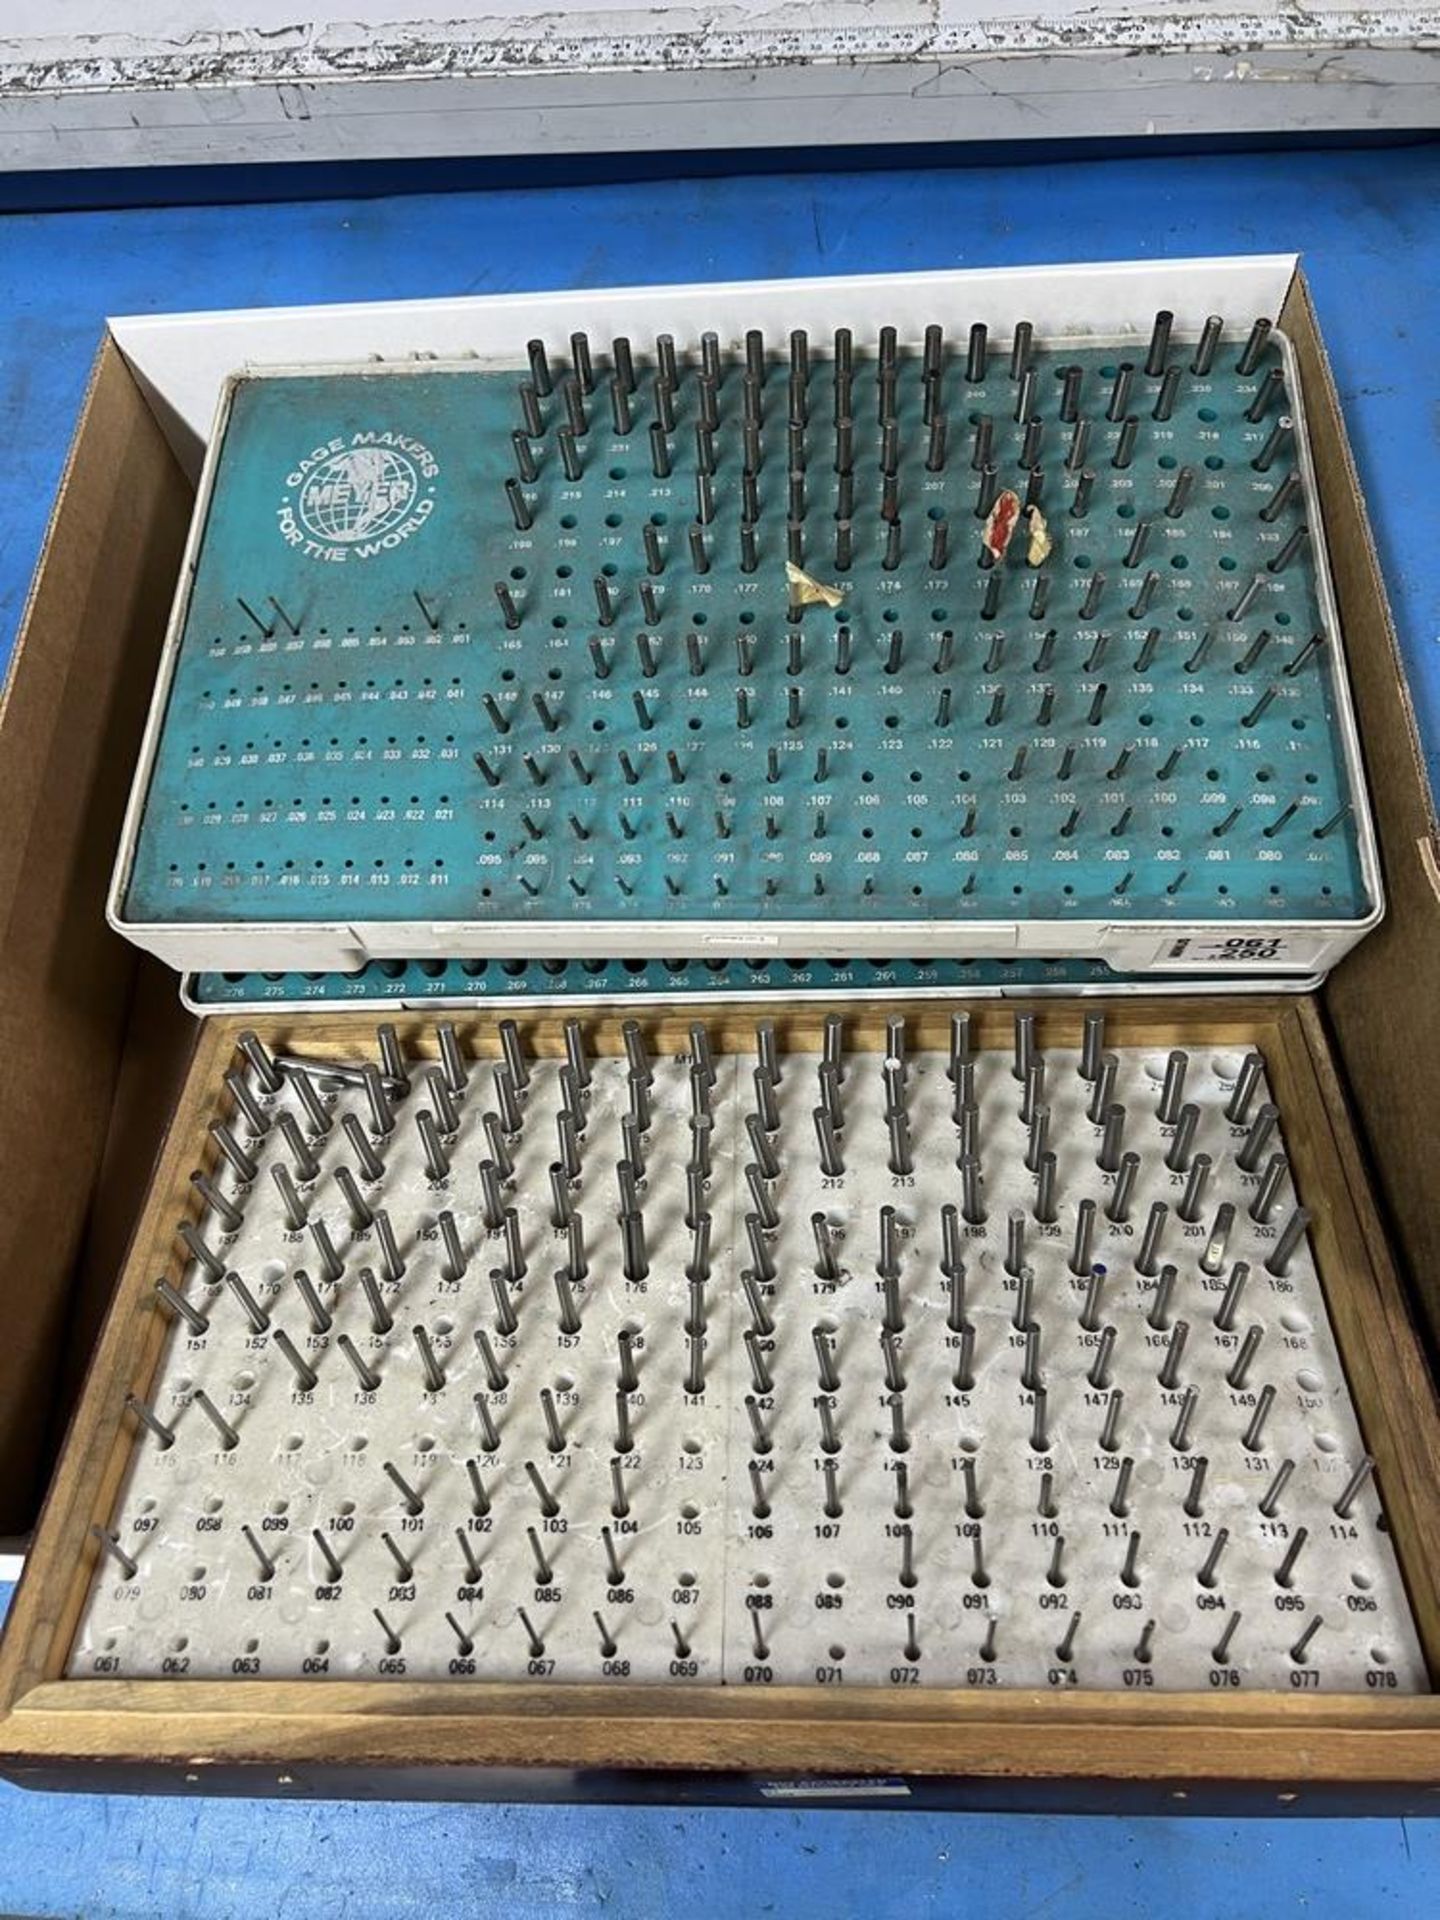 Meyer Pin Gage Set .061 - .3250 minus & .251 .500 incomplete & .061 - .250 Pin Gage Set Incomplete